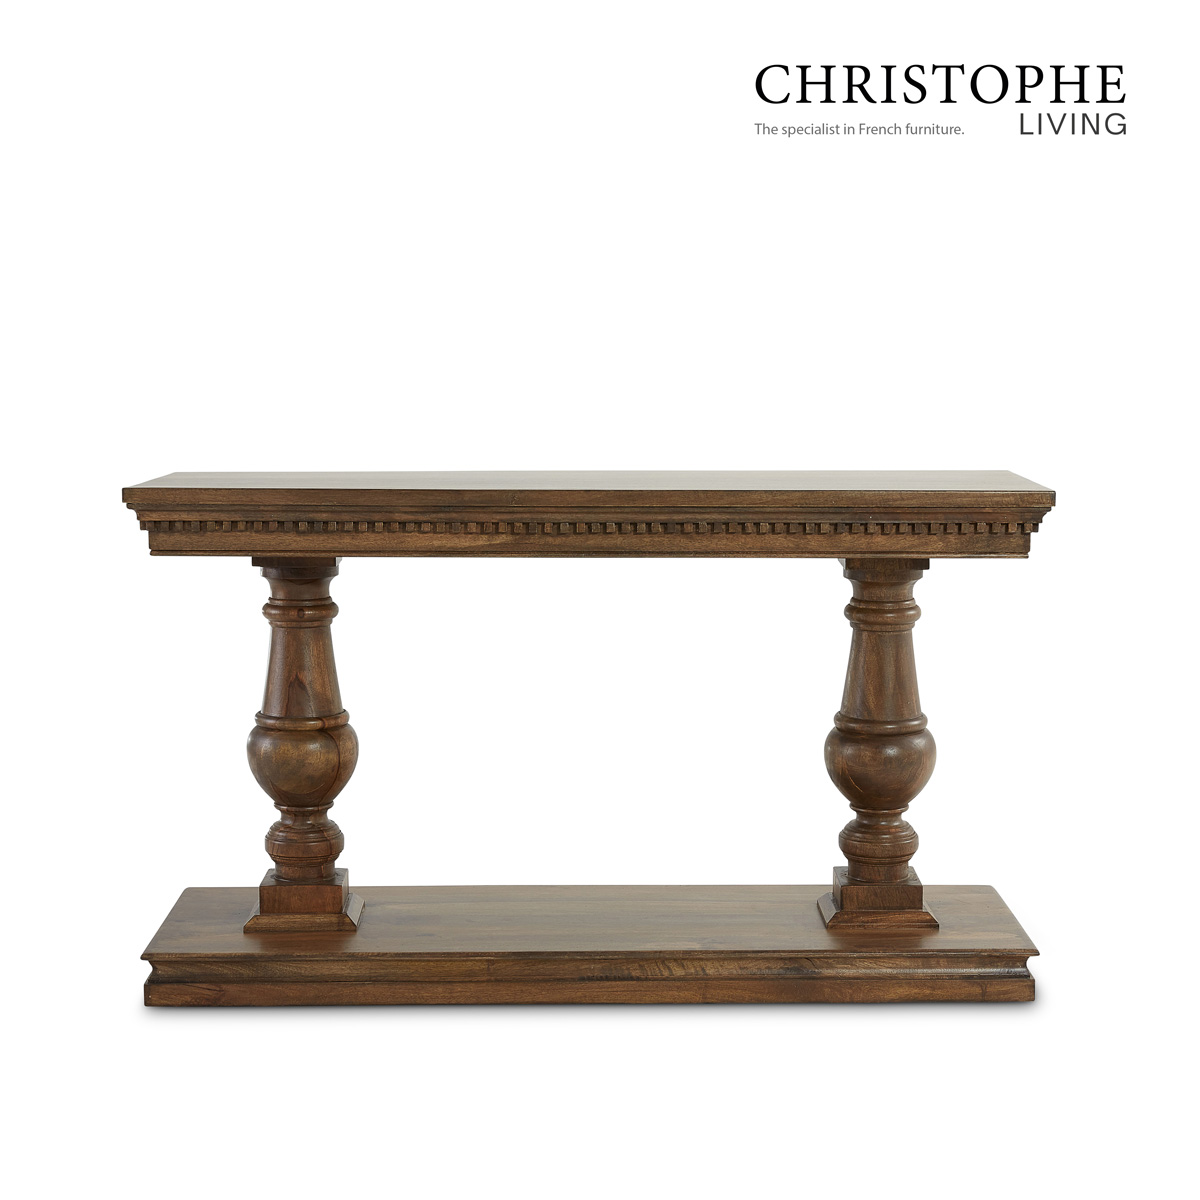 Valentino French Provincial Console Table in Dark Walnut Stain for Living Room, Hallway, or Dining Room